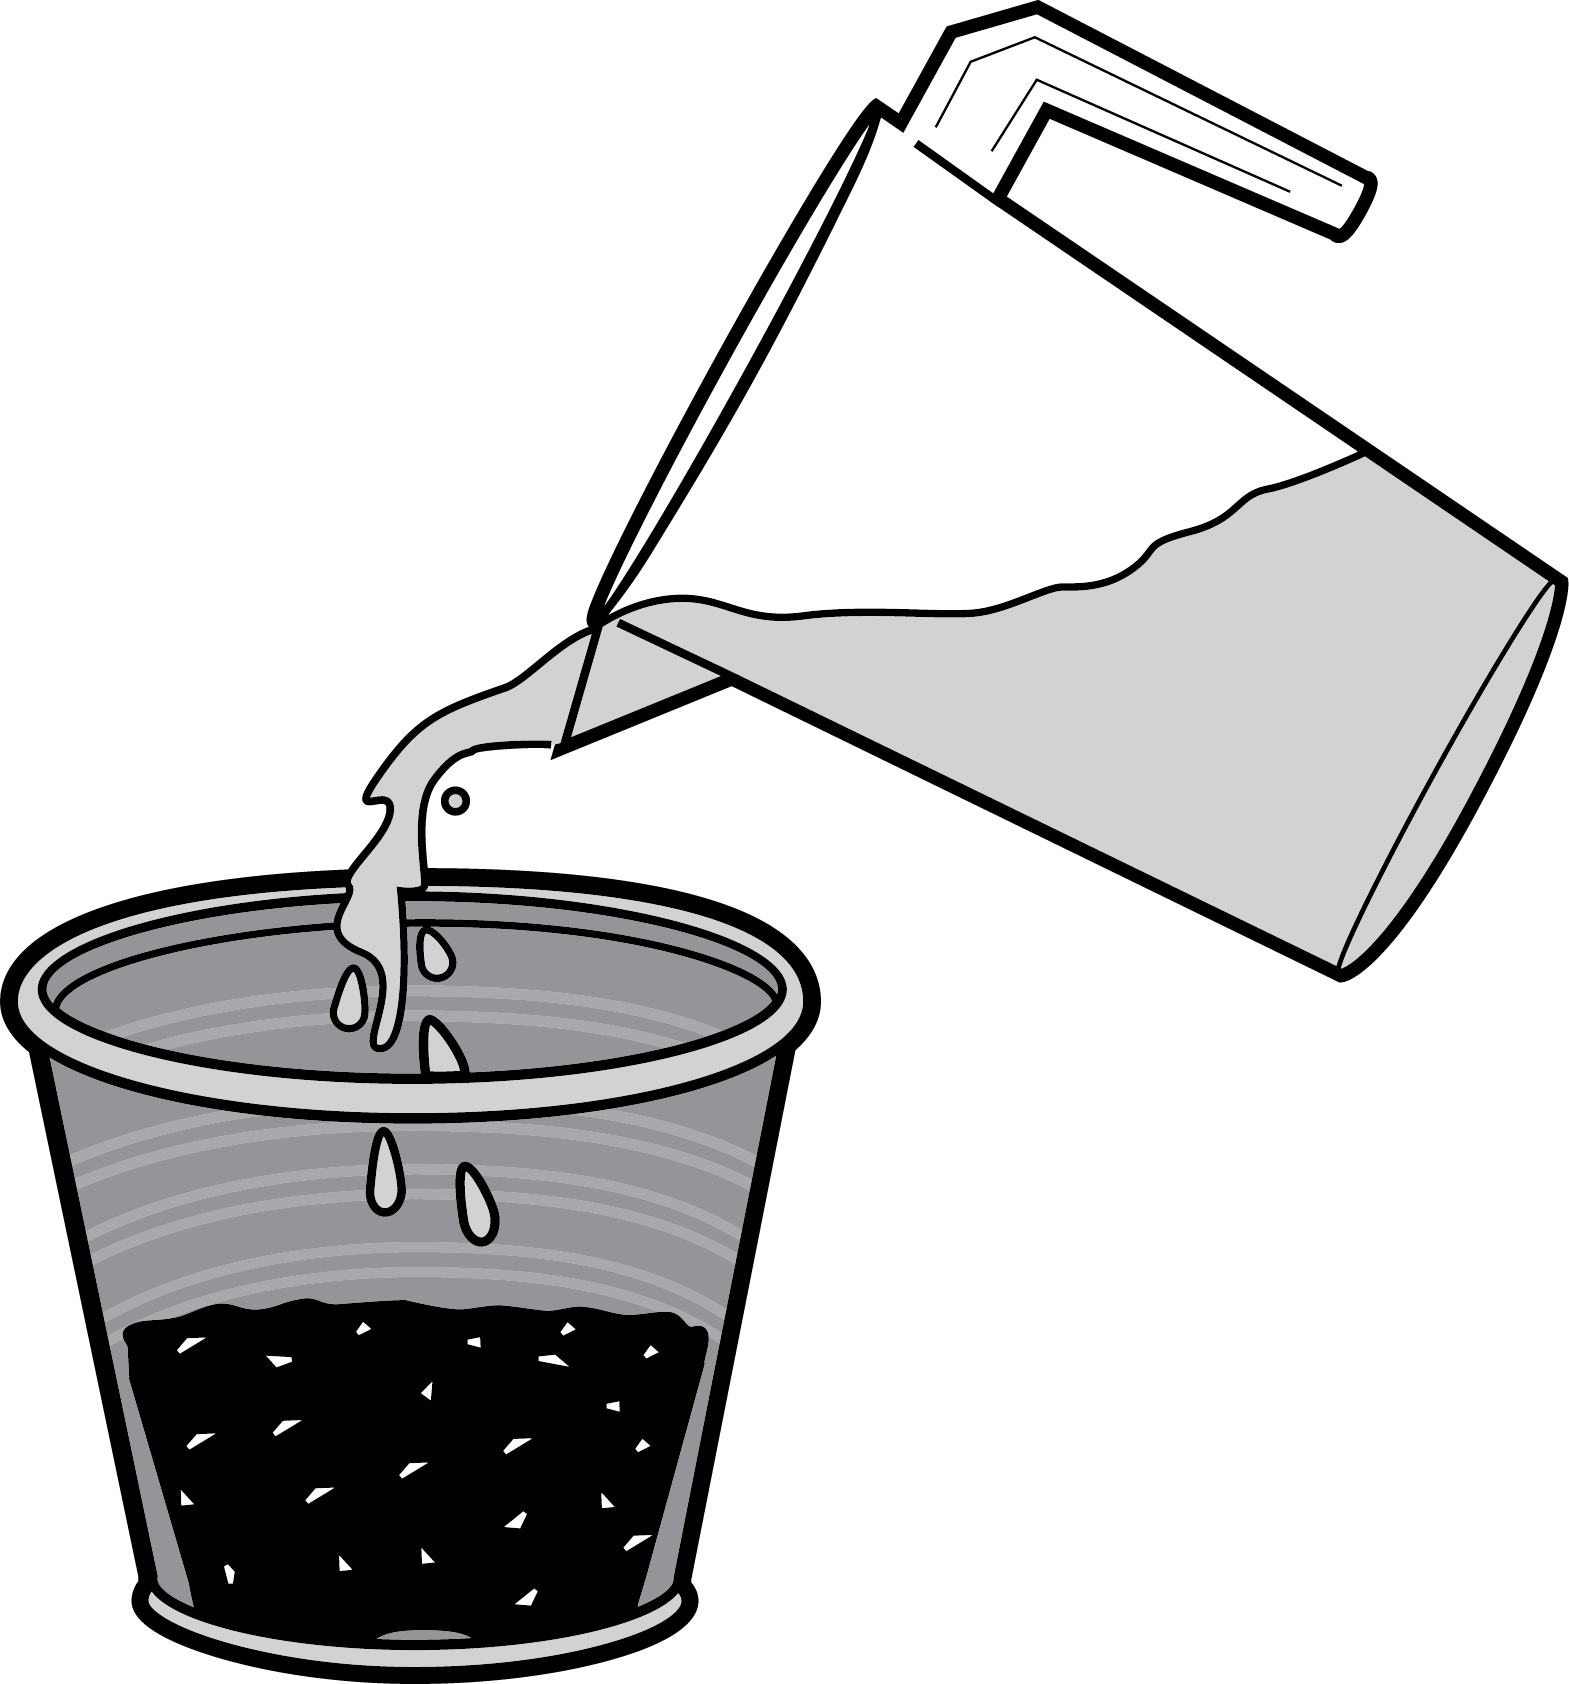 5-Pouring-Water-into-Container